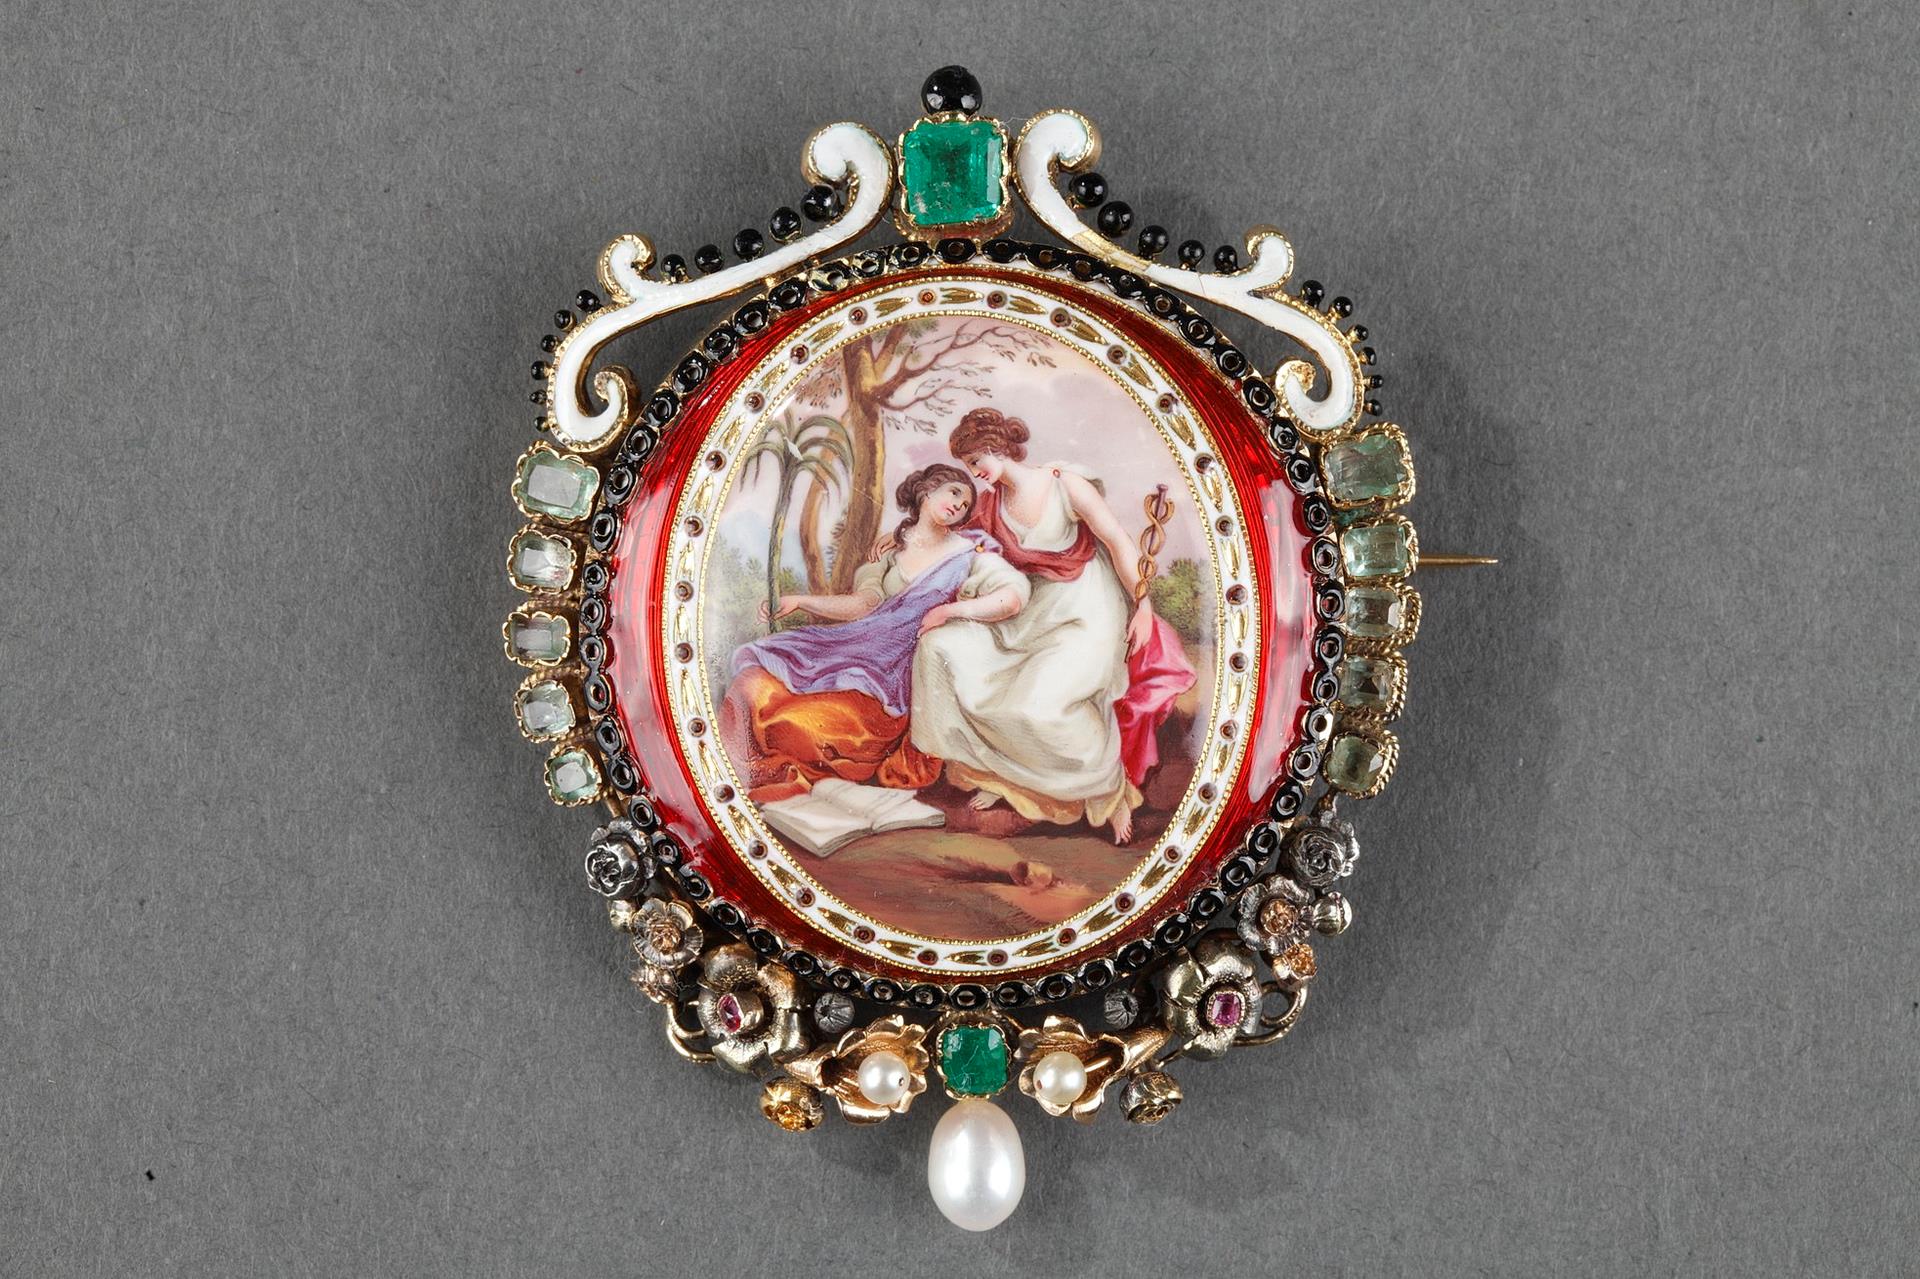 Gold-Mounted Brooch in gold, enamel and stones. 